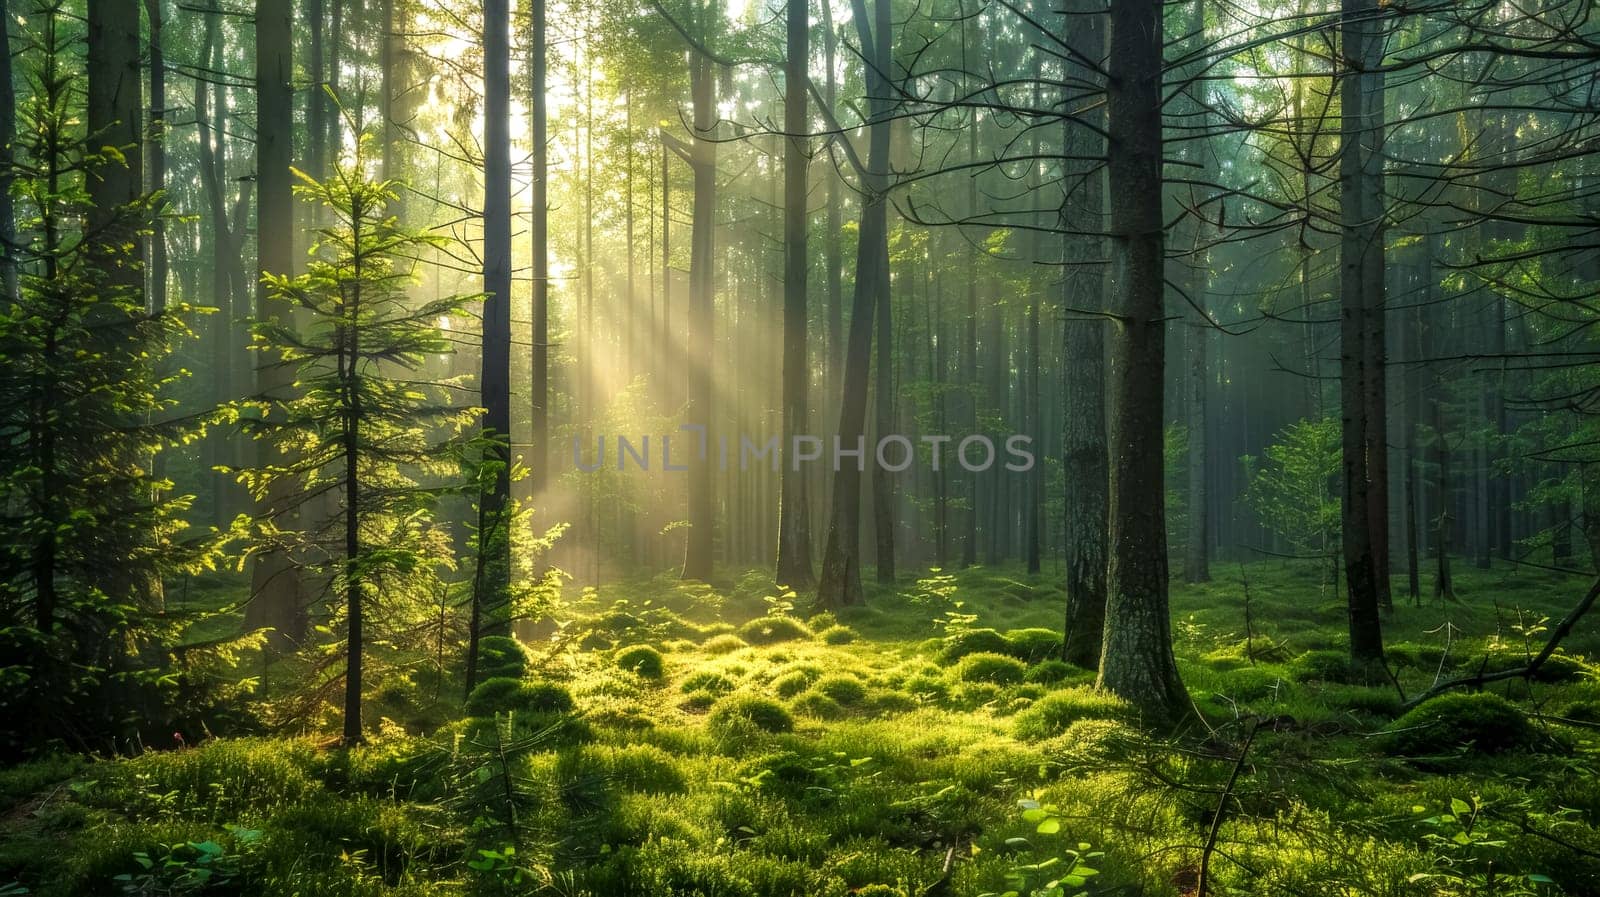 Magical sunbeams filtering through a misty green forest